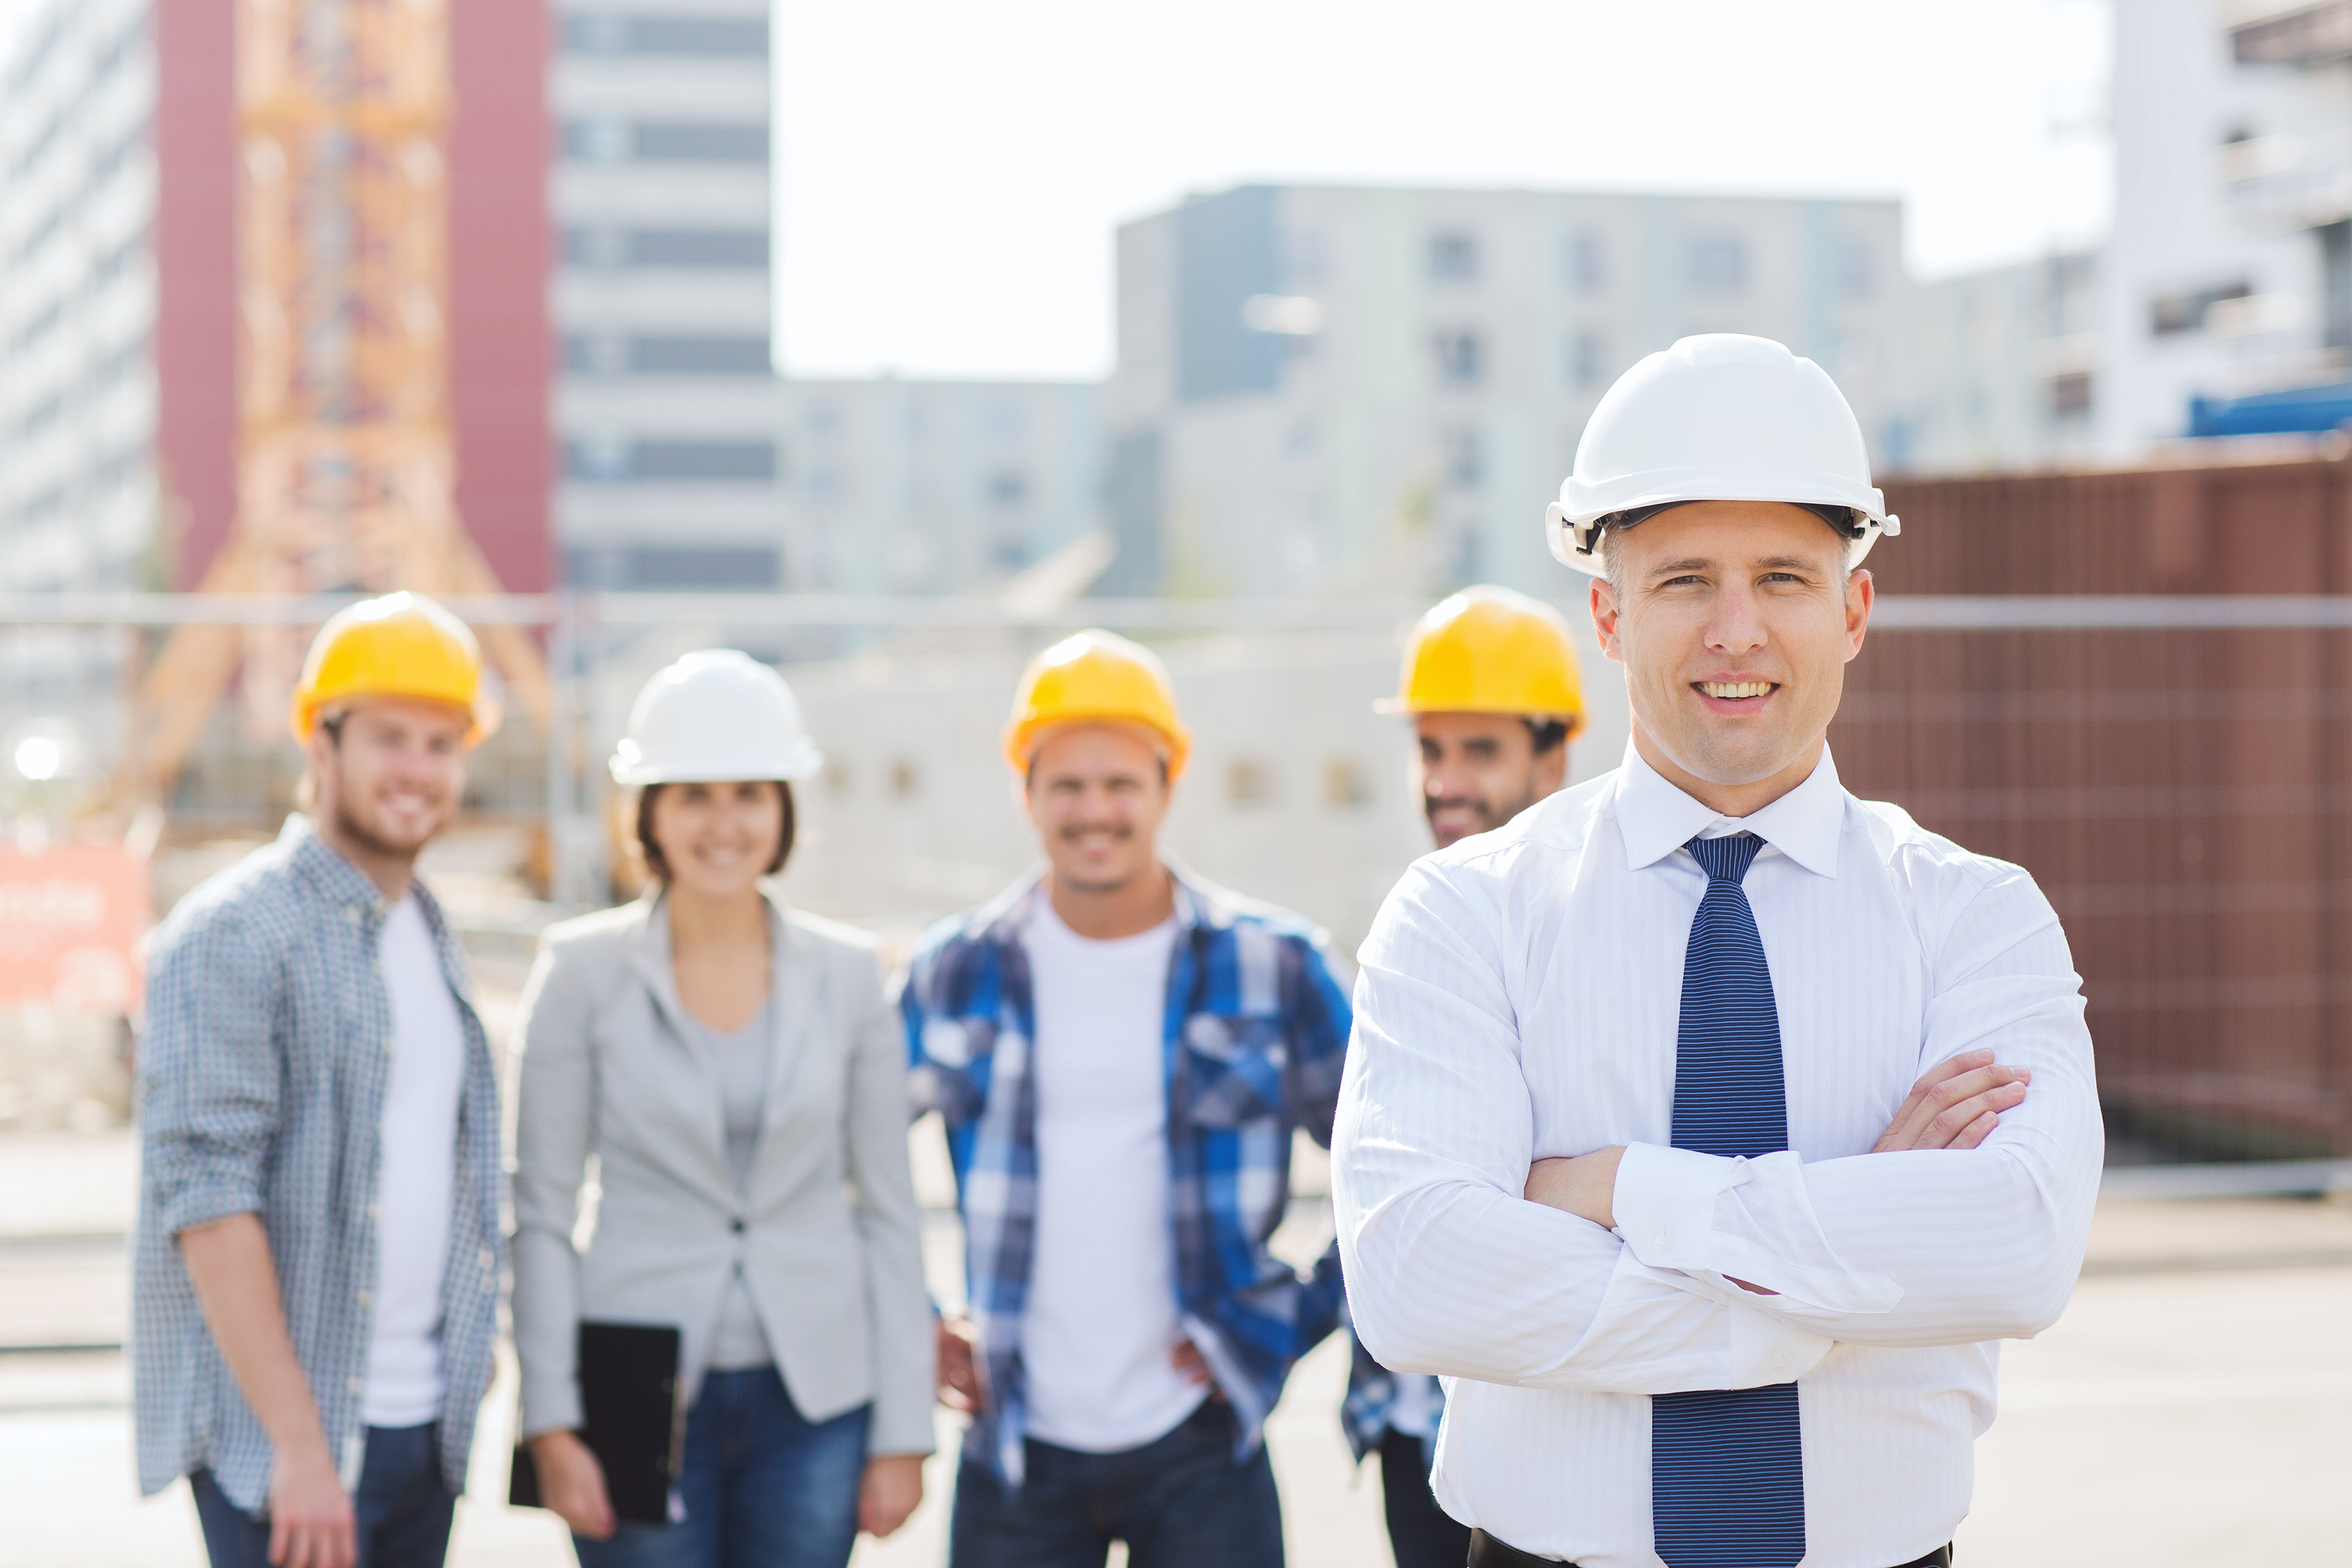 Construction Talent, Attract Construction Talent, Construction Candidates, Construction Jobs